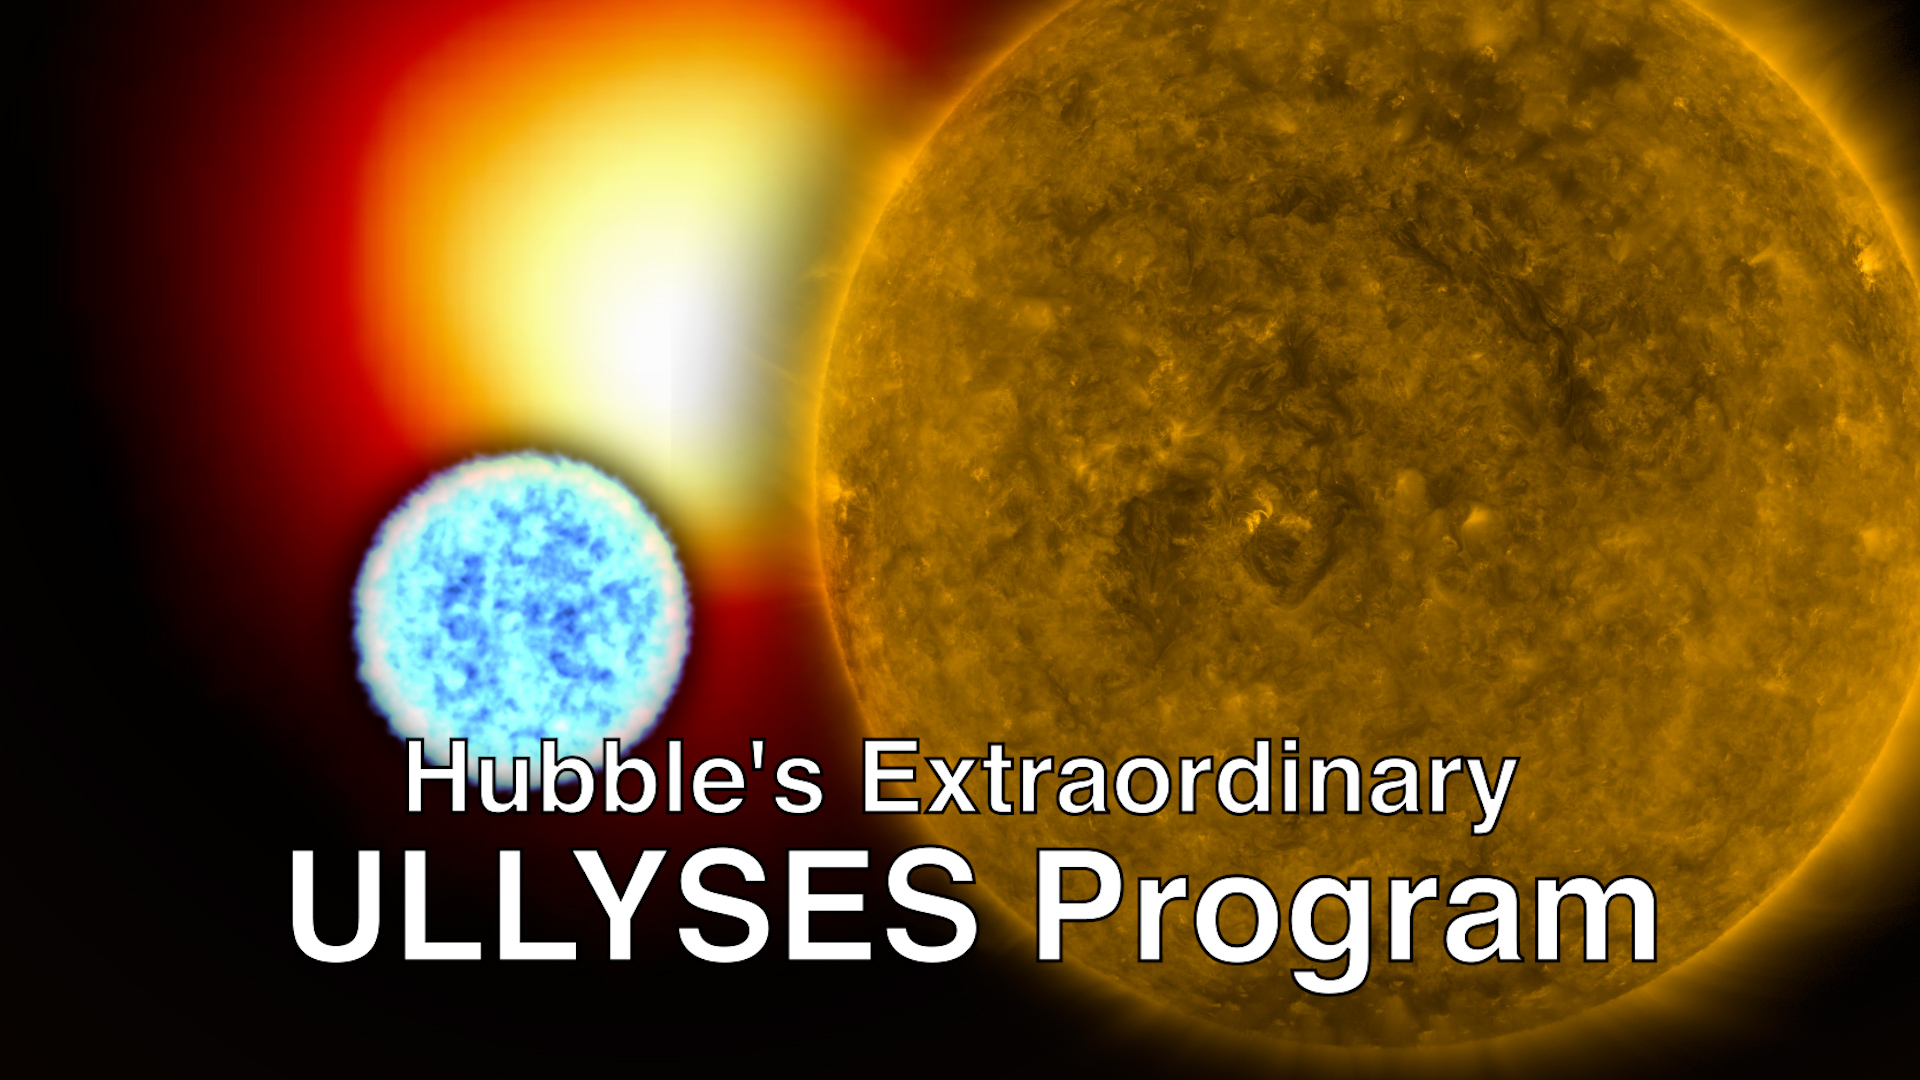 Preview Image for Hubble's Extraordinary ULLYSES Program